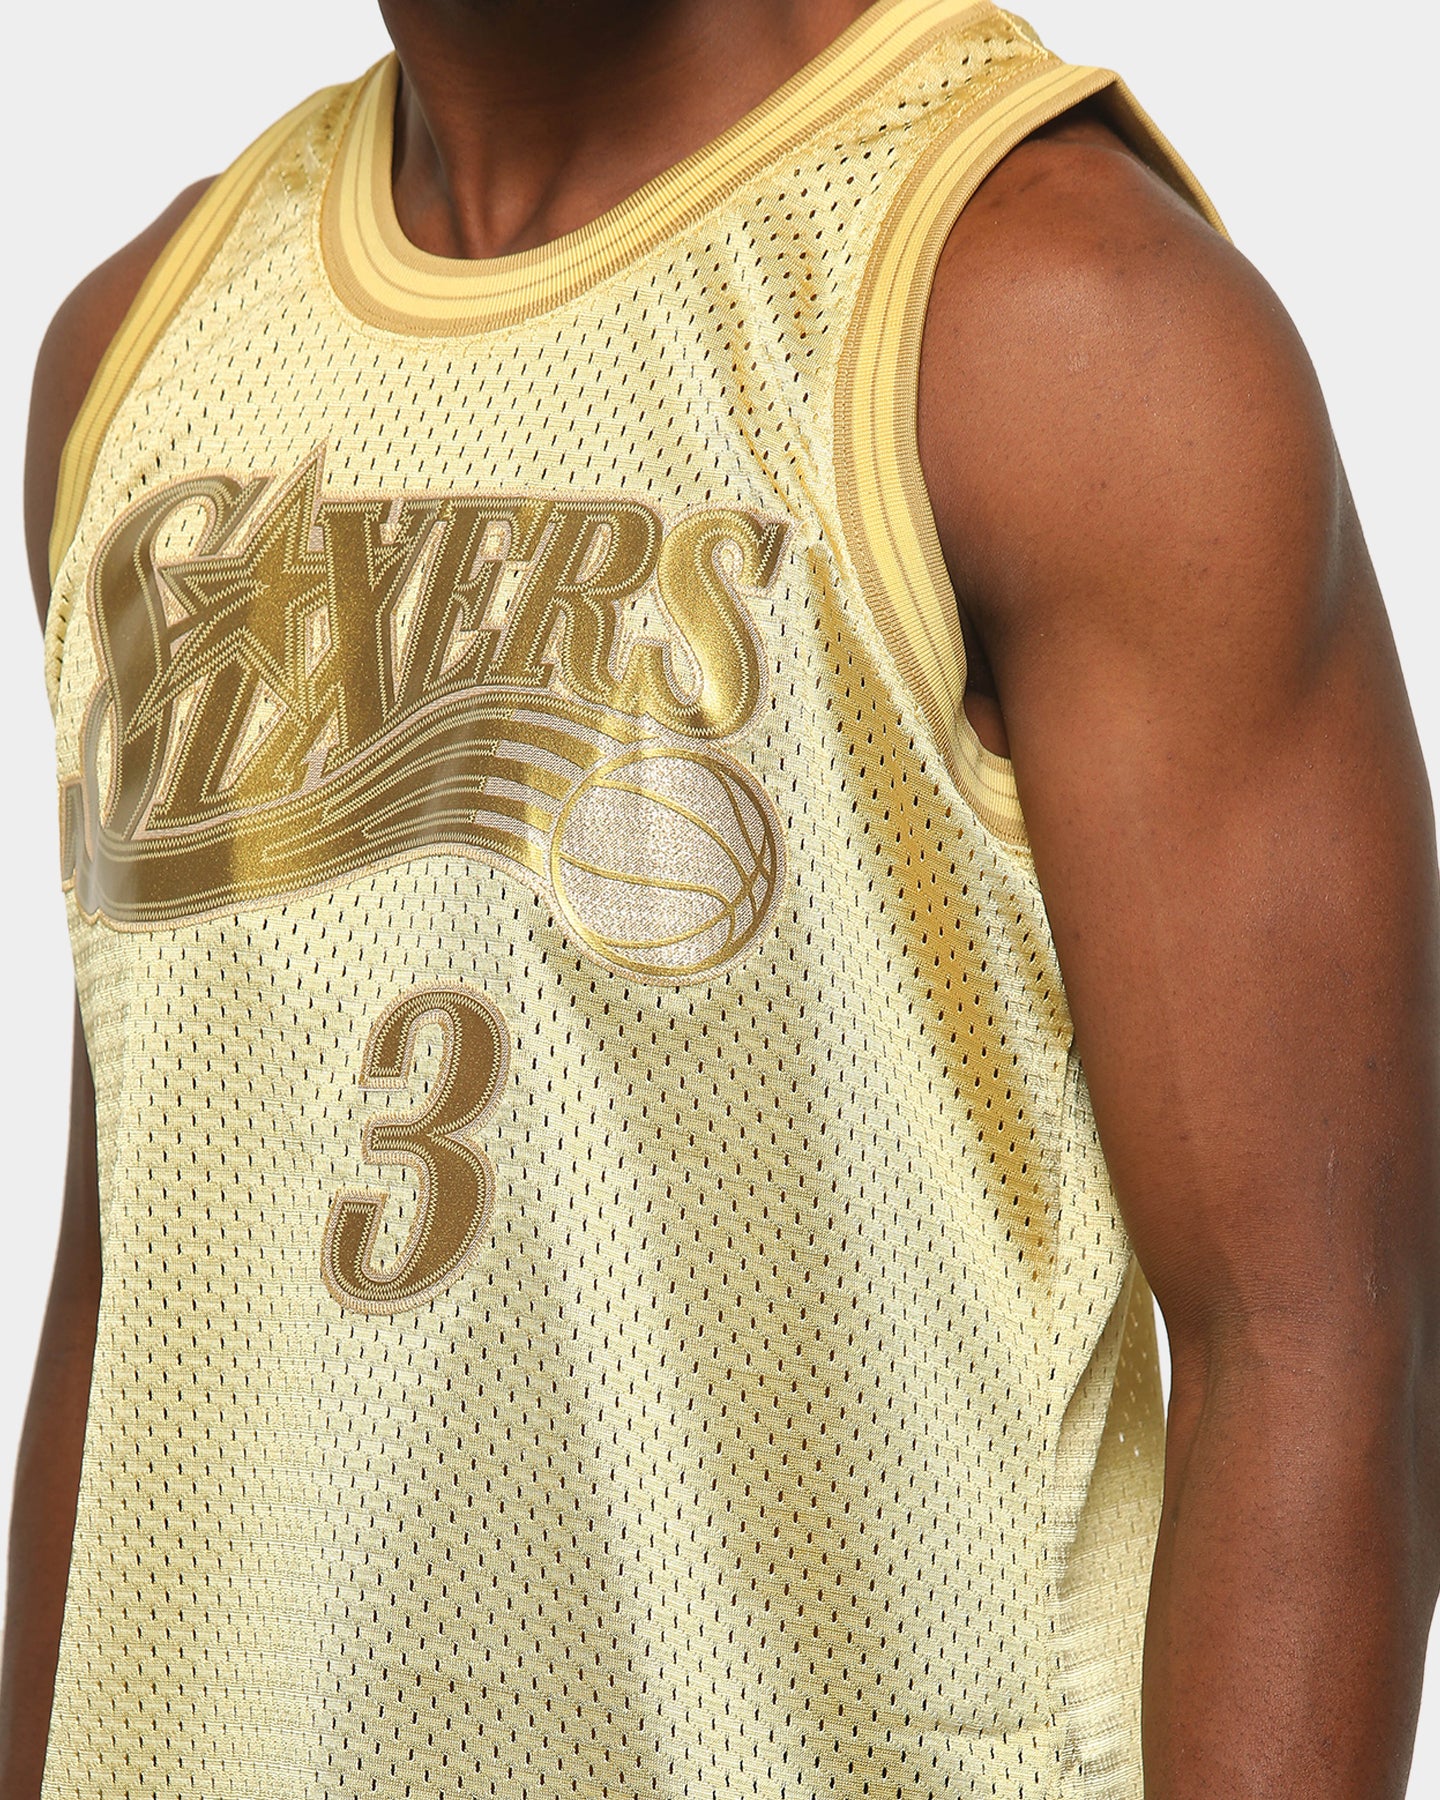 iverson gold jersey